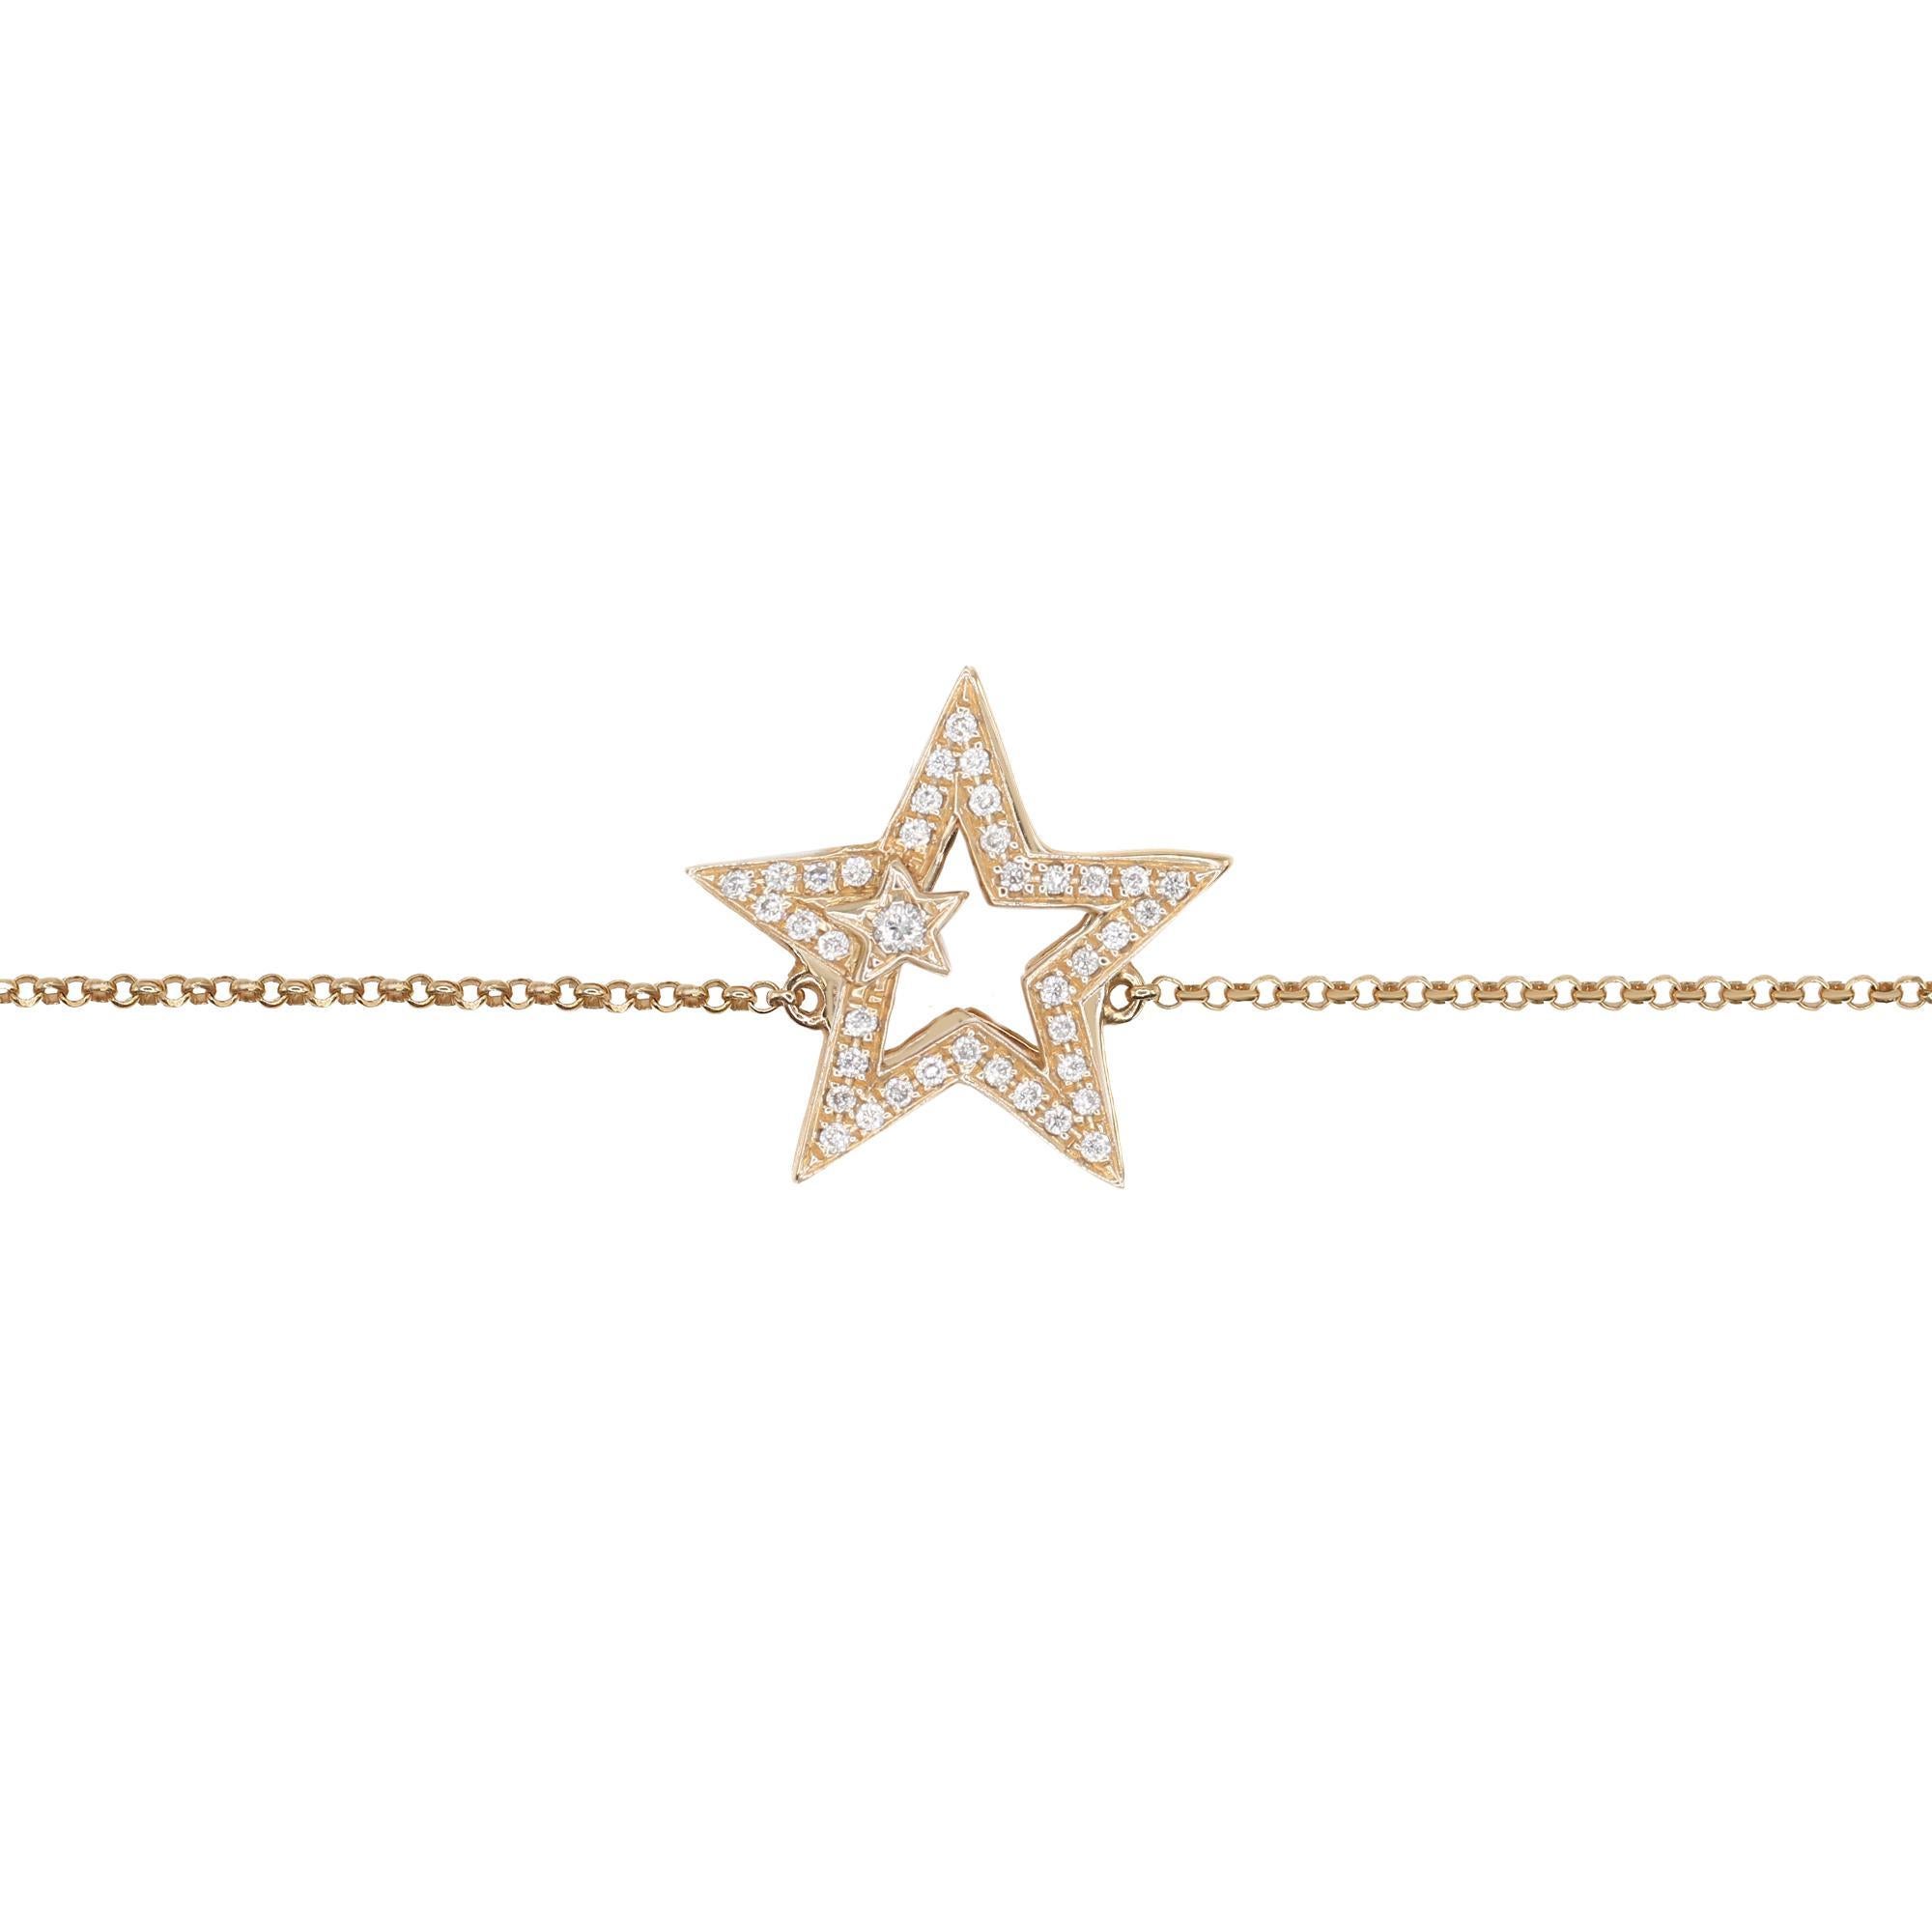 Lightness and simplicity is what makes this bracelet special. A diamond star bracelet, set with 0.19cttw of round cut diamonds. Diamond color I and SI-I clarity. This piece is crafted with 18k rose gold. Bracelet length: 7 inches. Adjustable chain.